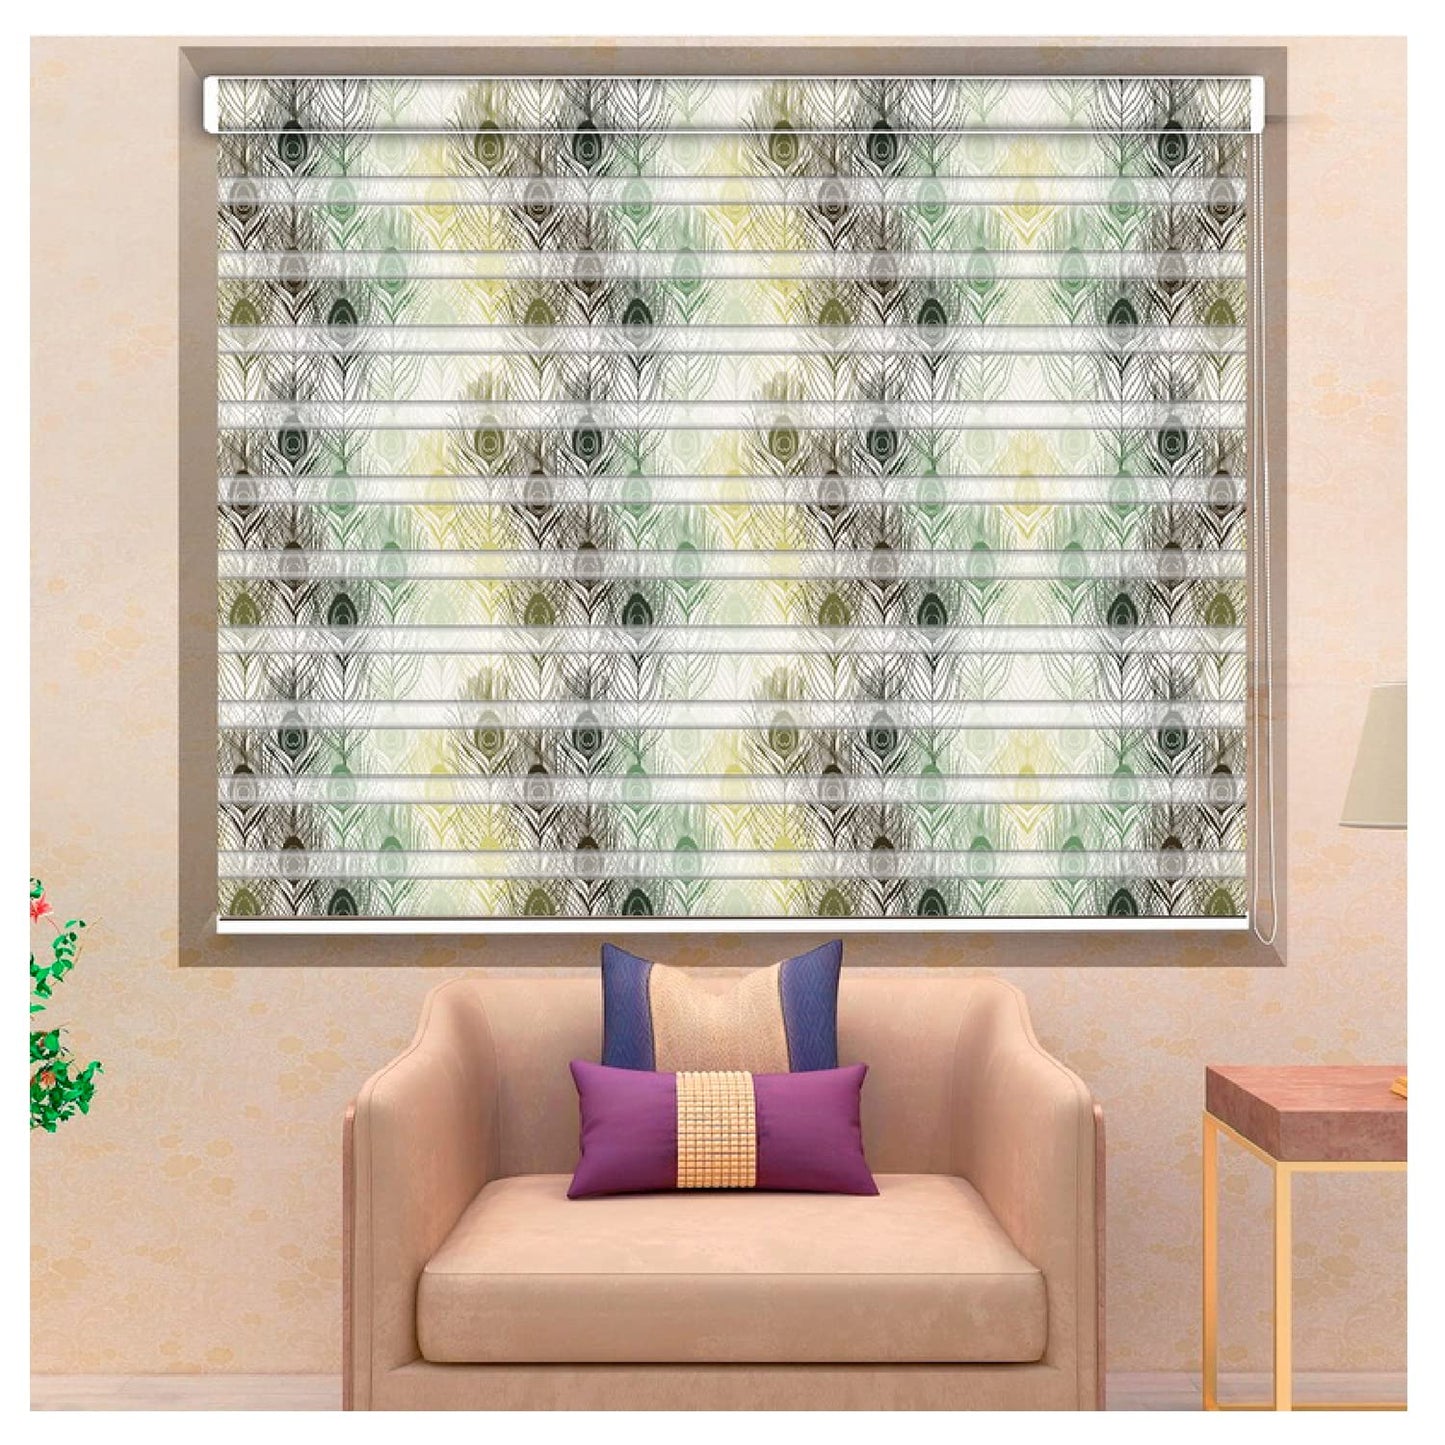 Zebra Blinds for Windows and Doors with Dual Shade, Horizontal Stripes, Blinds for Home & Office (Customized Size, Small peacock)